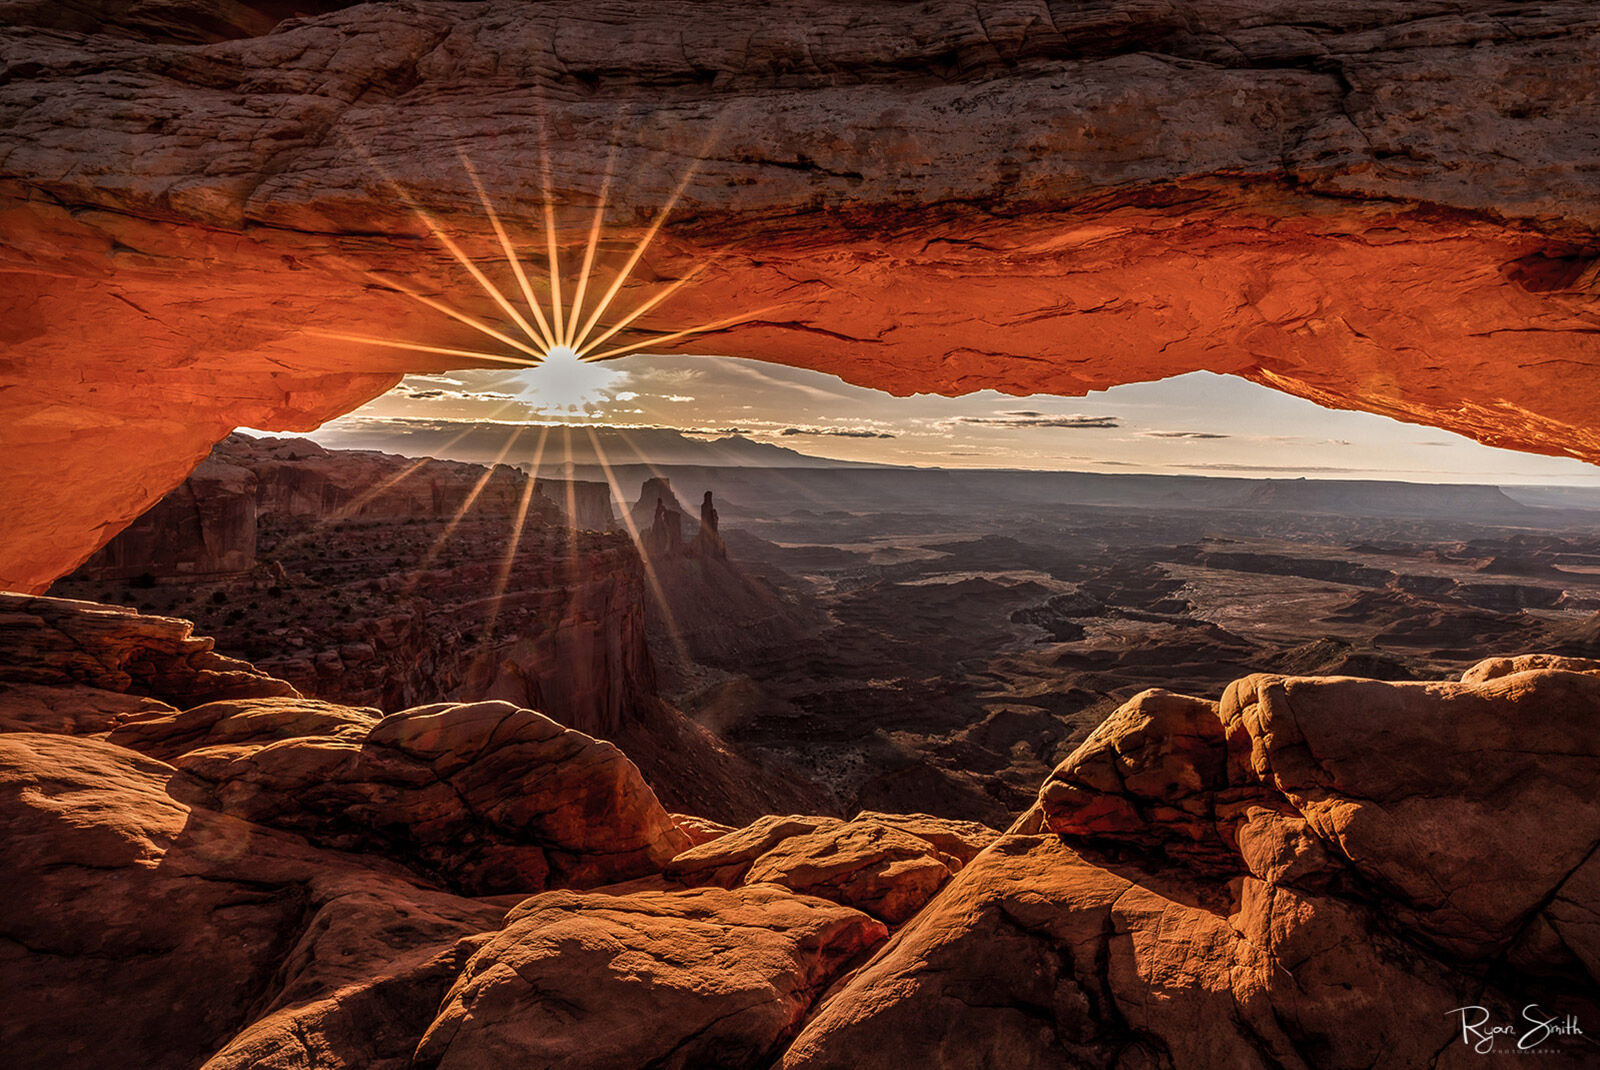 The sun rises and is viewed from under a sandstone arch that glows orange as the canyon below can be viewed and a sunburst sparkles from under the arch.